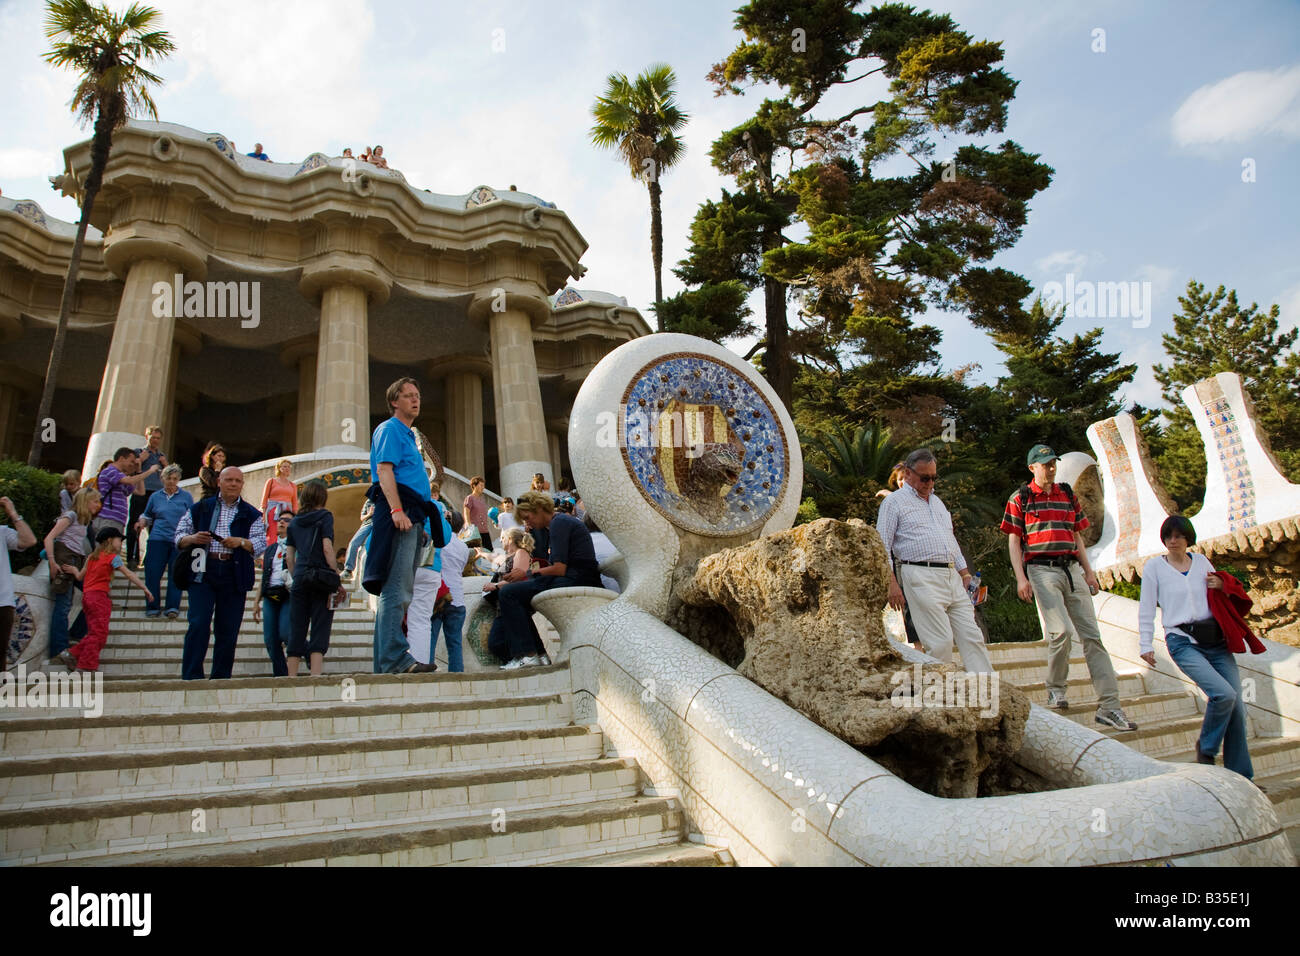 SPAIN Barcelona Dry fountain entrance to Parc Guell designed Antoni Gaudi architect visitors on stairs drought conditions Stock Photo